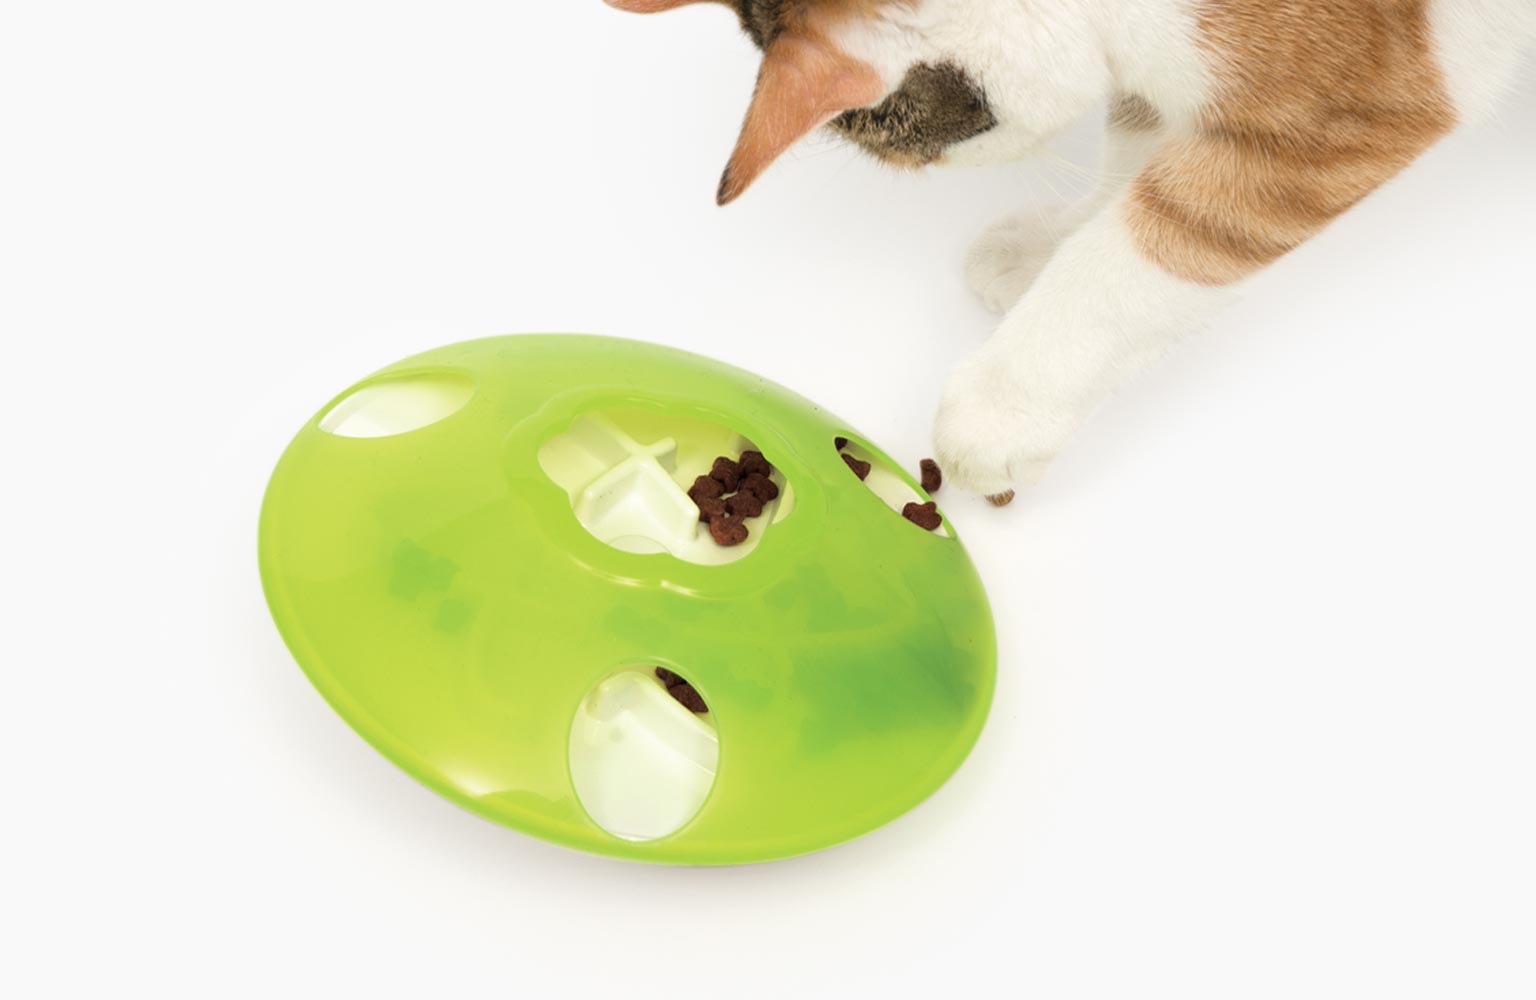 https://www.catit.com/wp-content/uploads/2022/03/catit-treat-spinner-Product-page-banner-mobile.jpg